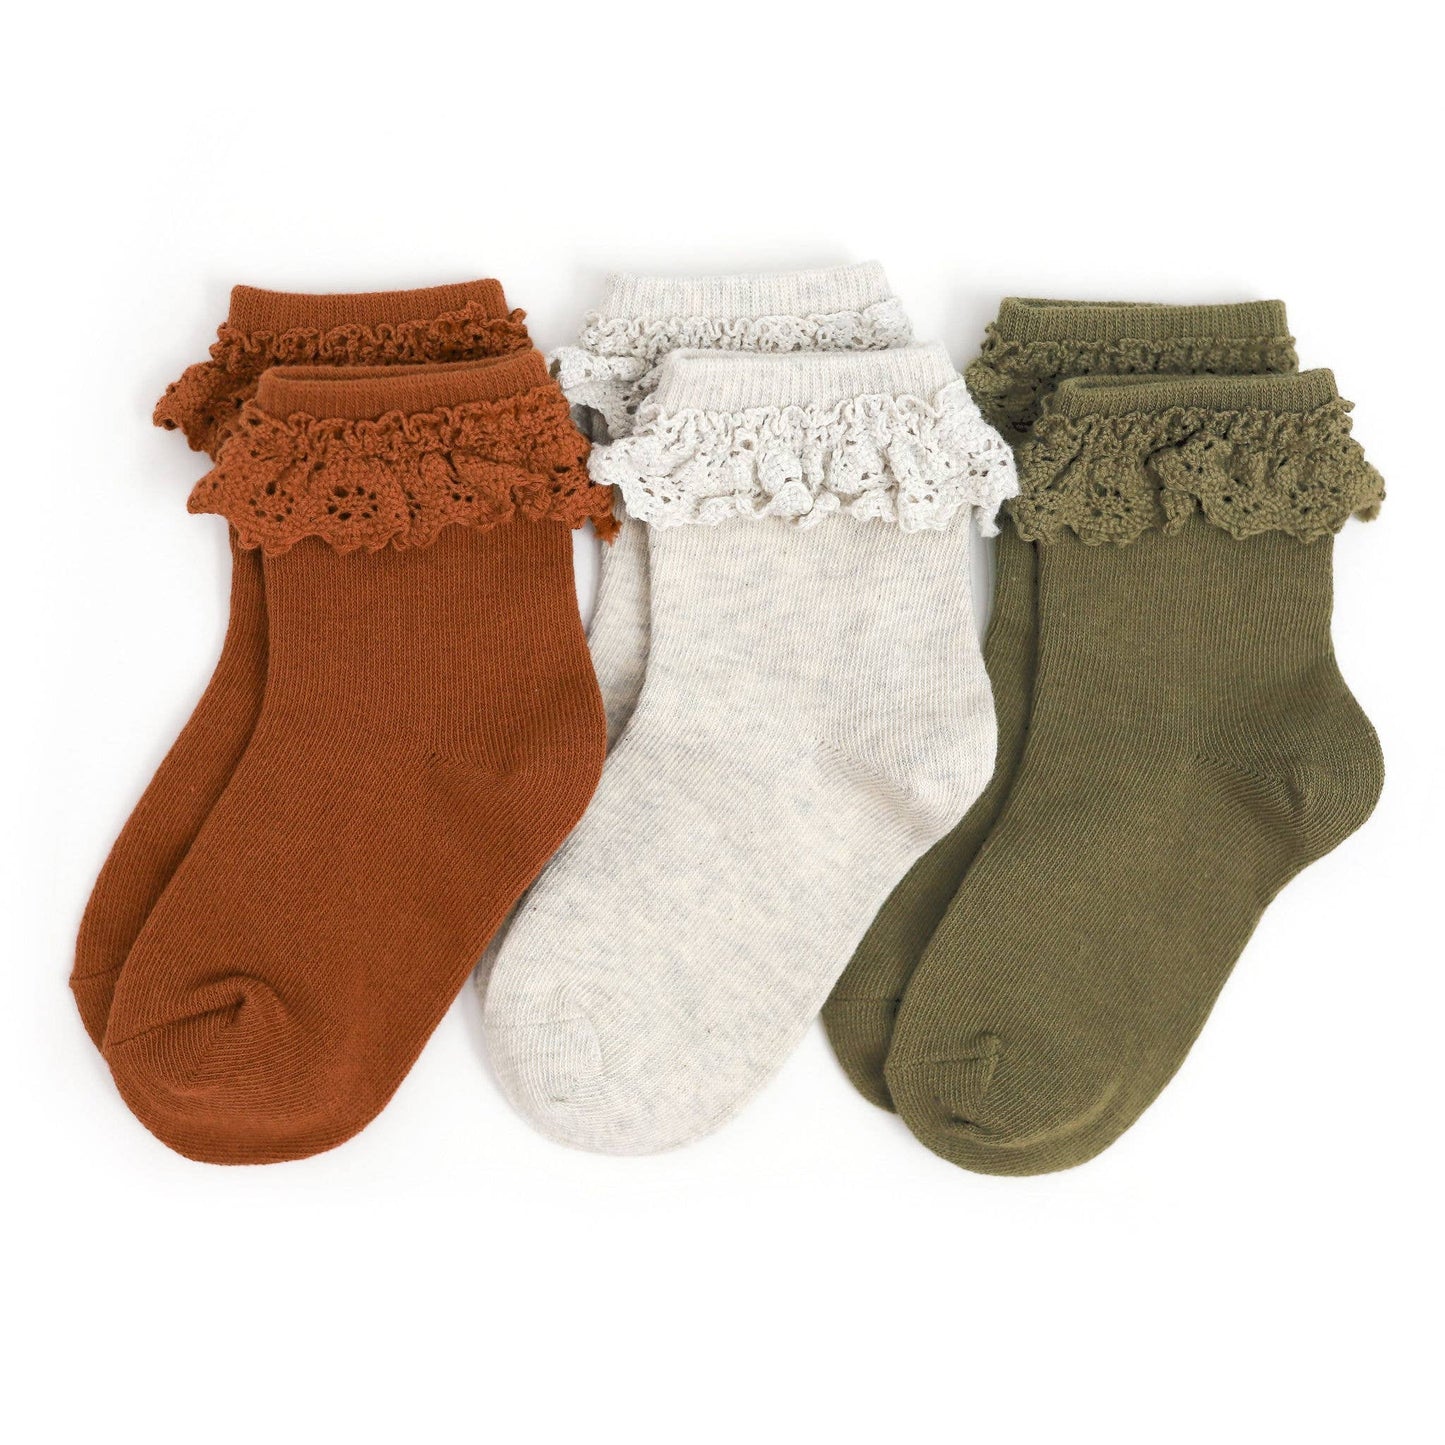 Little Stocking Co. - Roadtrip Lace Midi Sock 3-Pack: 6-18 MONTHS